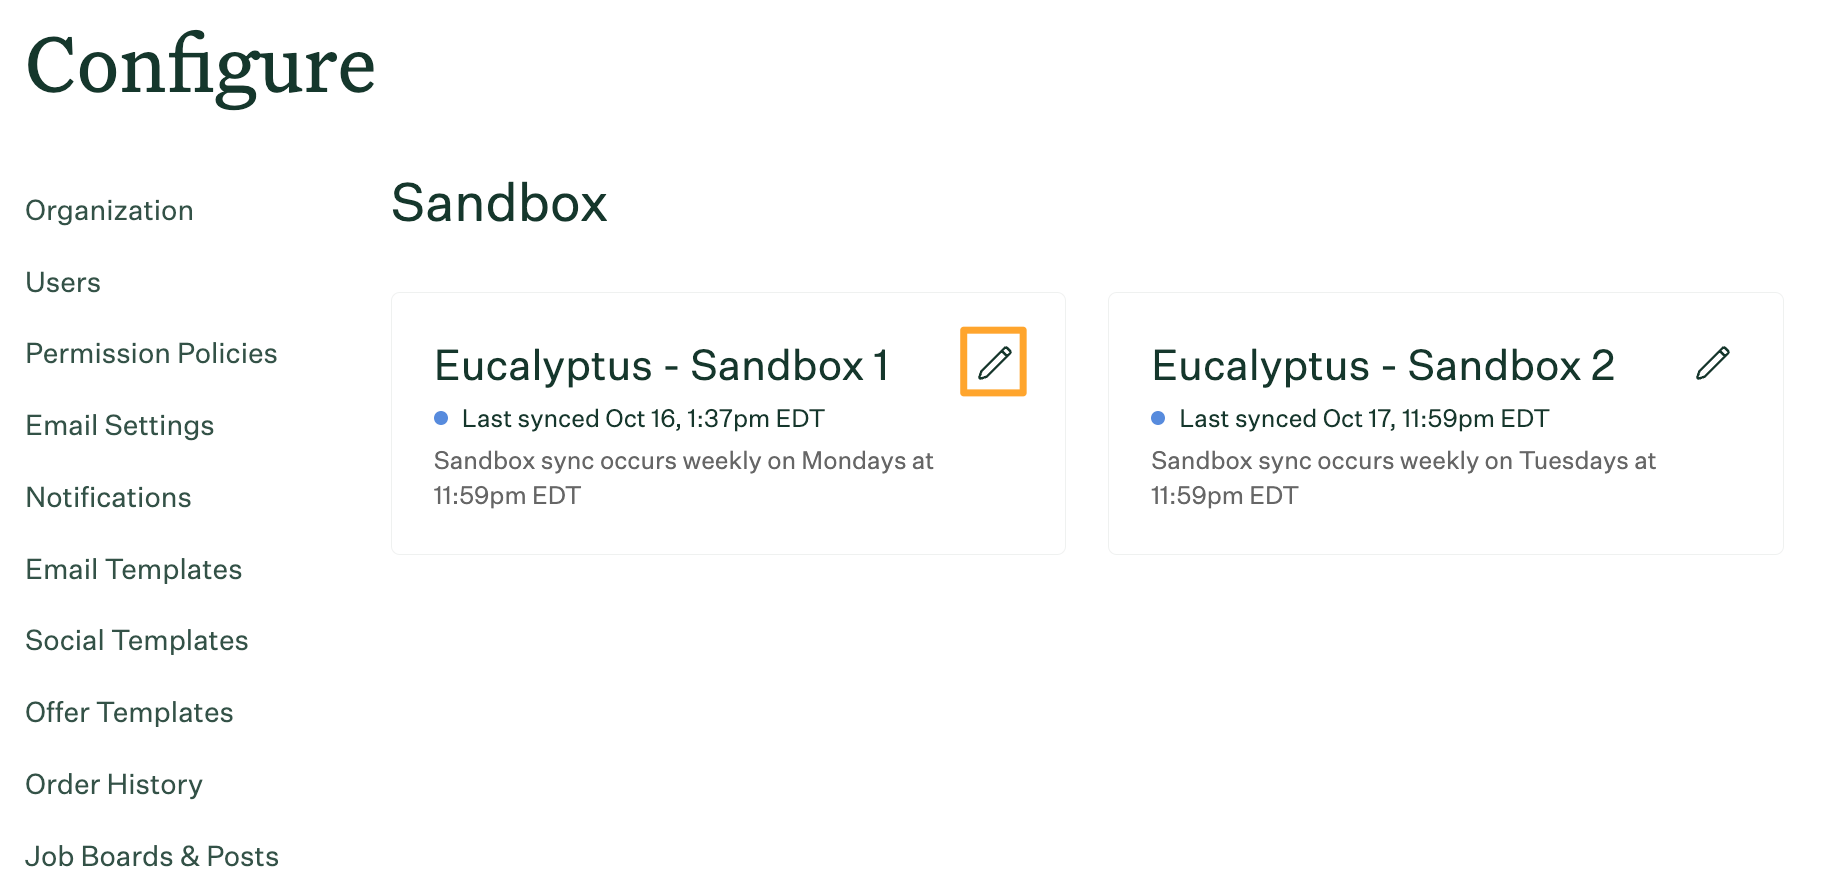 The sandbox page shows two sandbox environments named Eucalyptus - Sandbox with the Edit icon highlighted beside the first sandbox